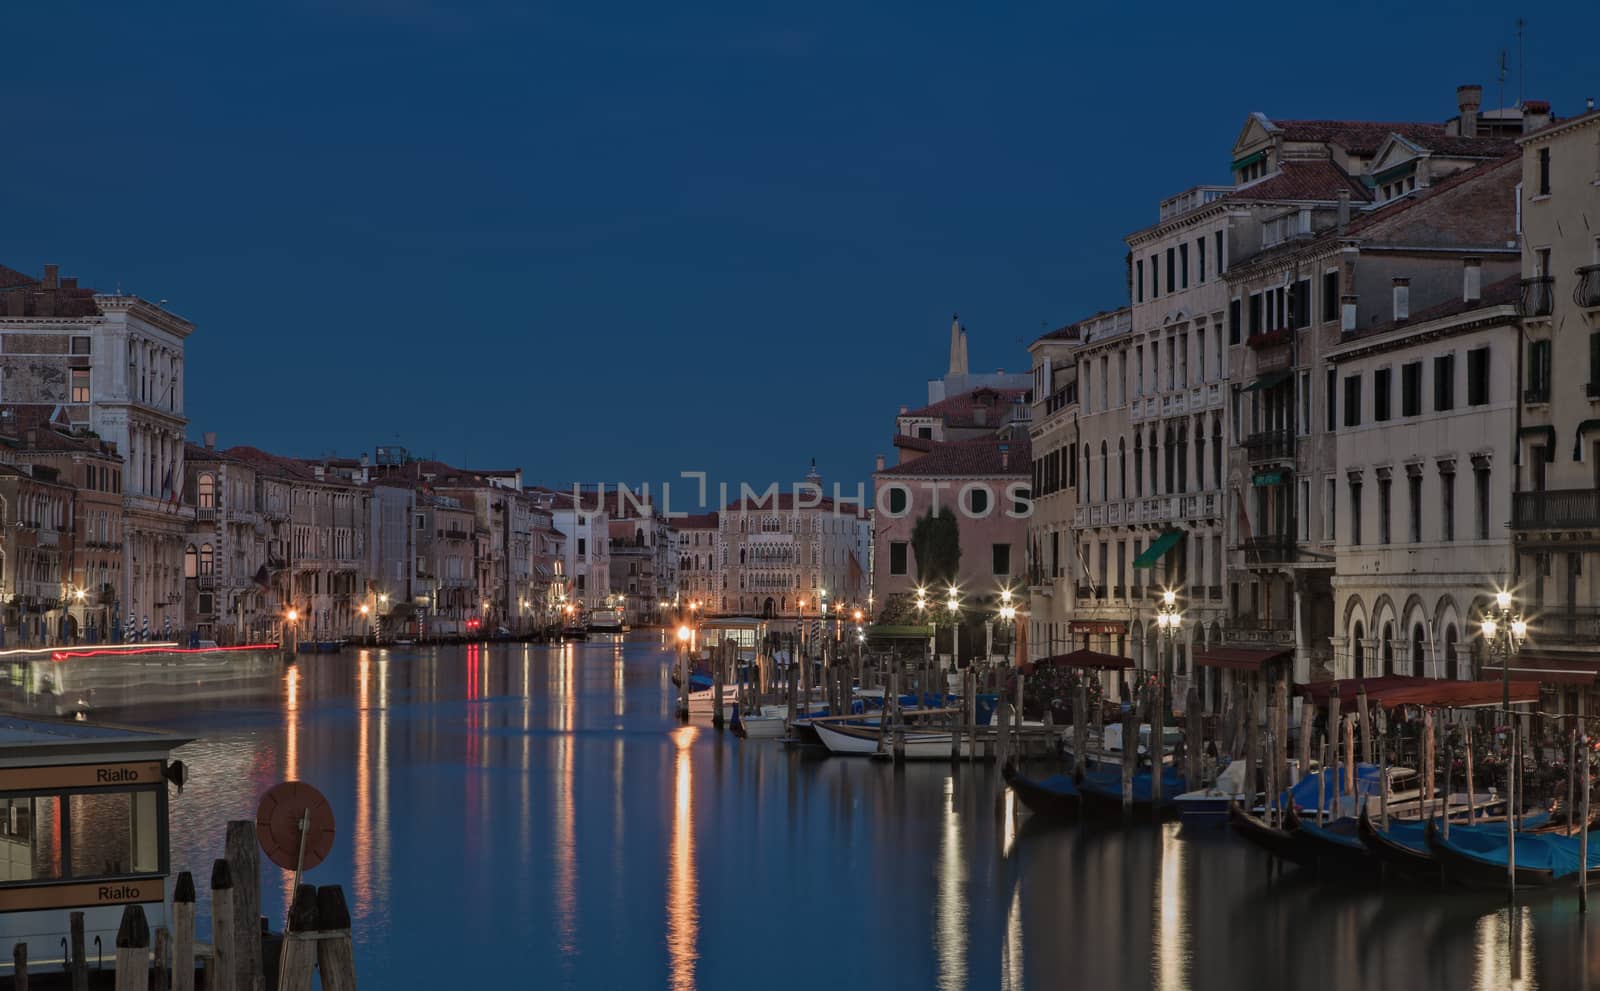 The Grand Canal in Venice in the evening by mot1963